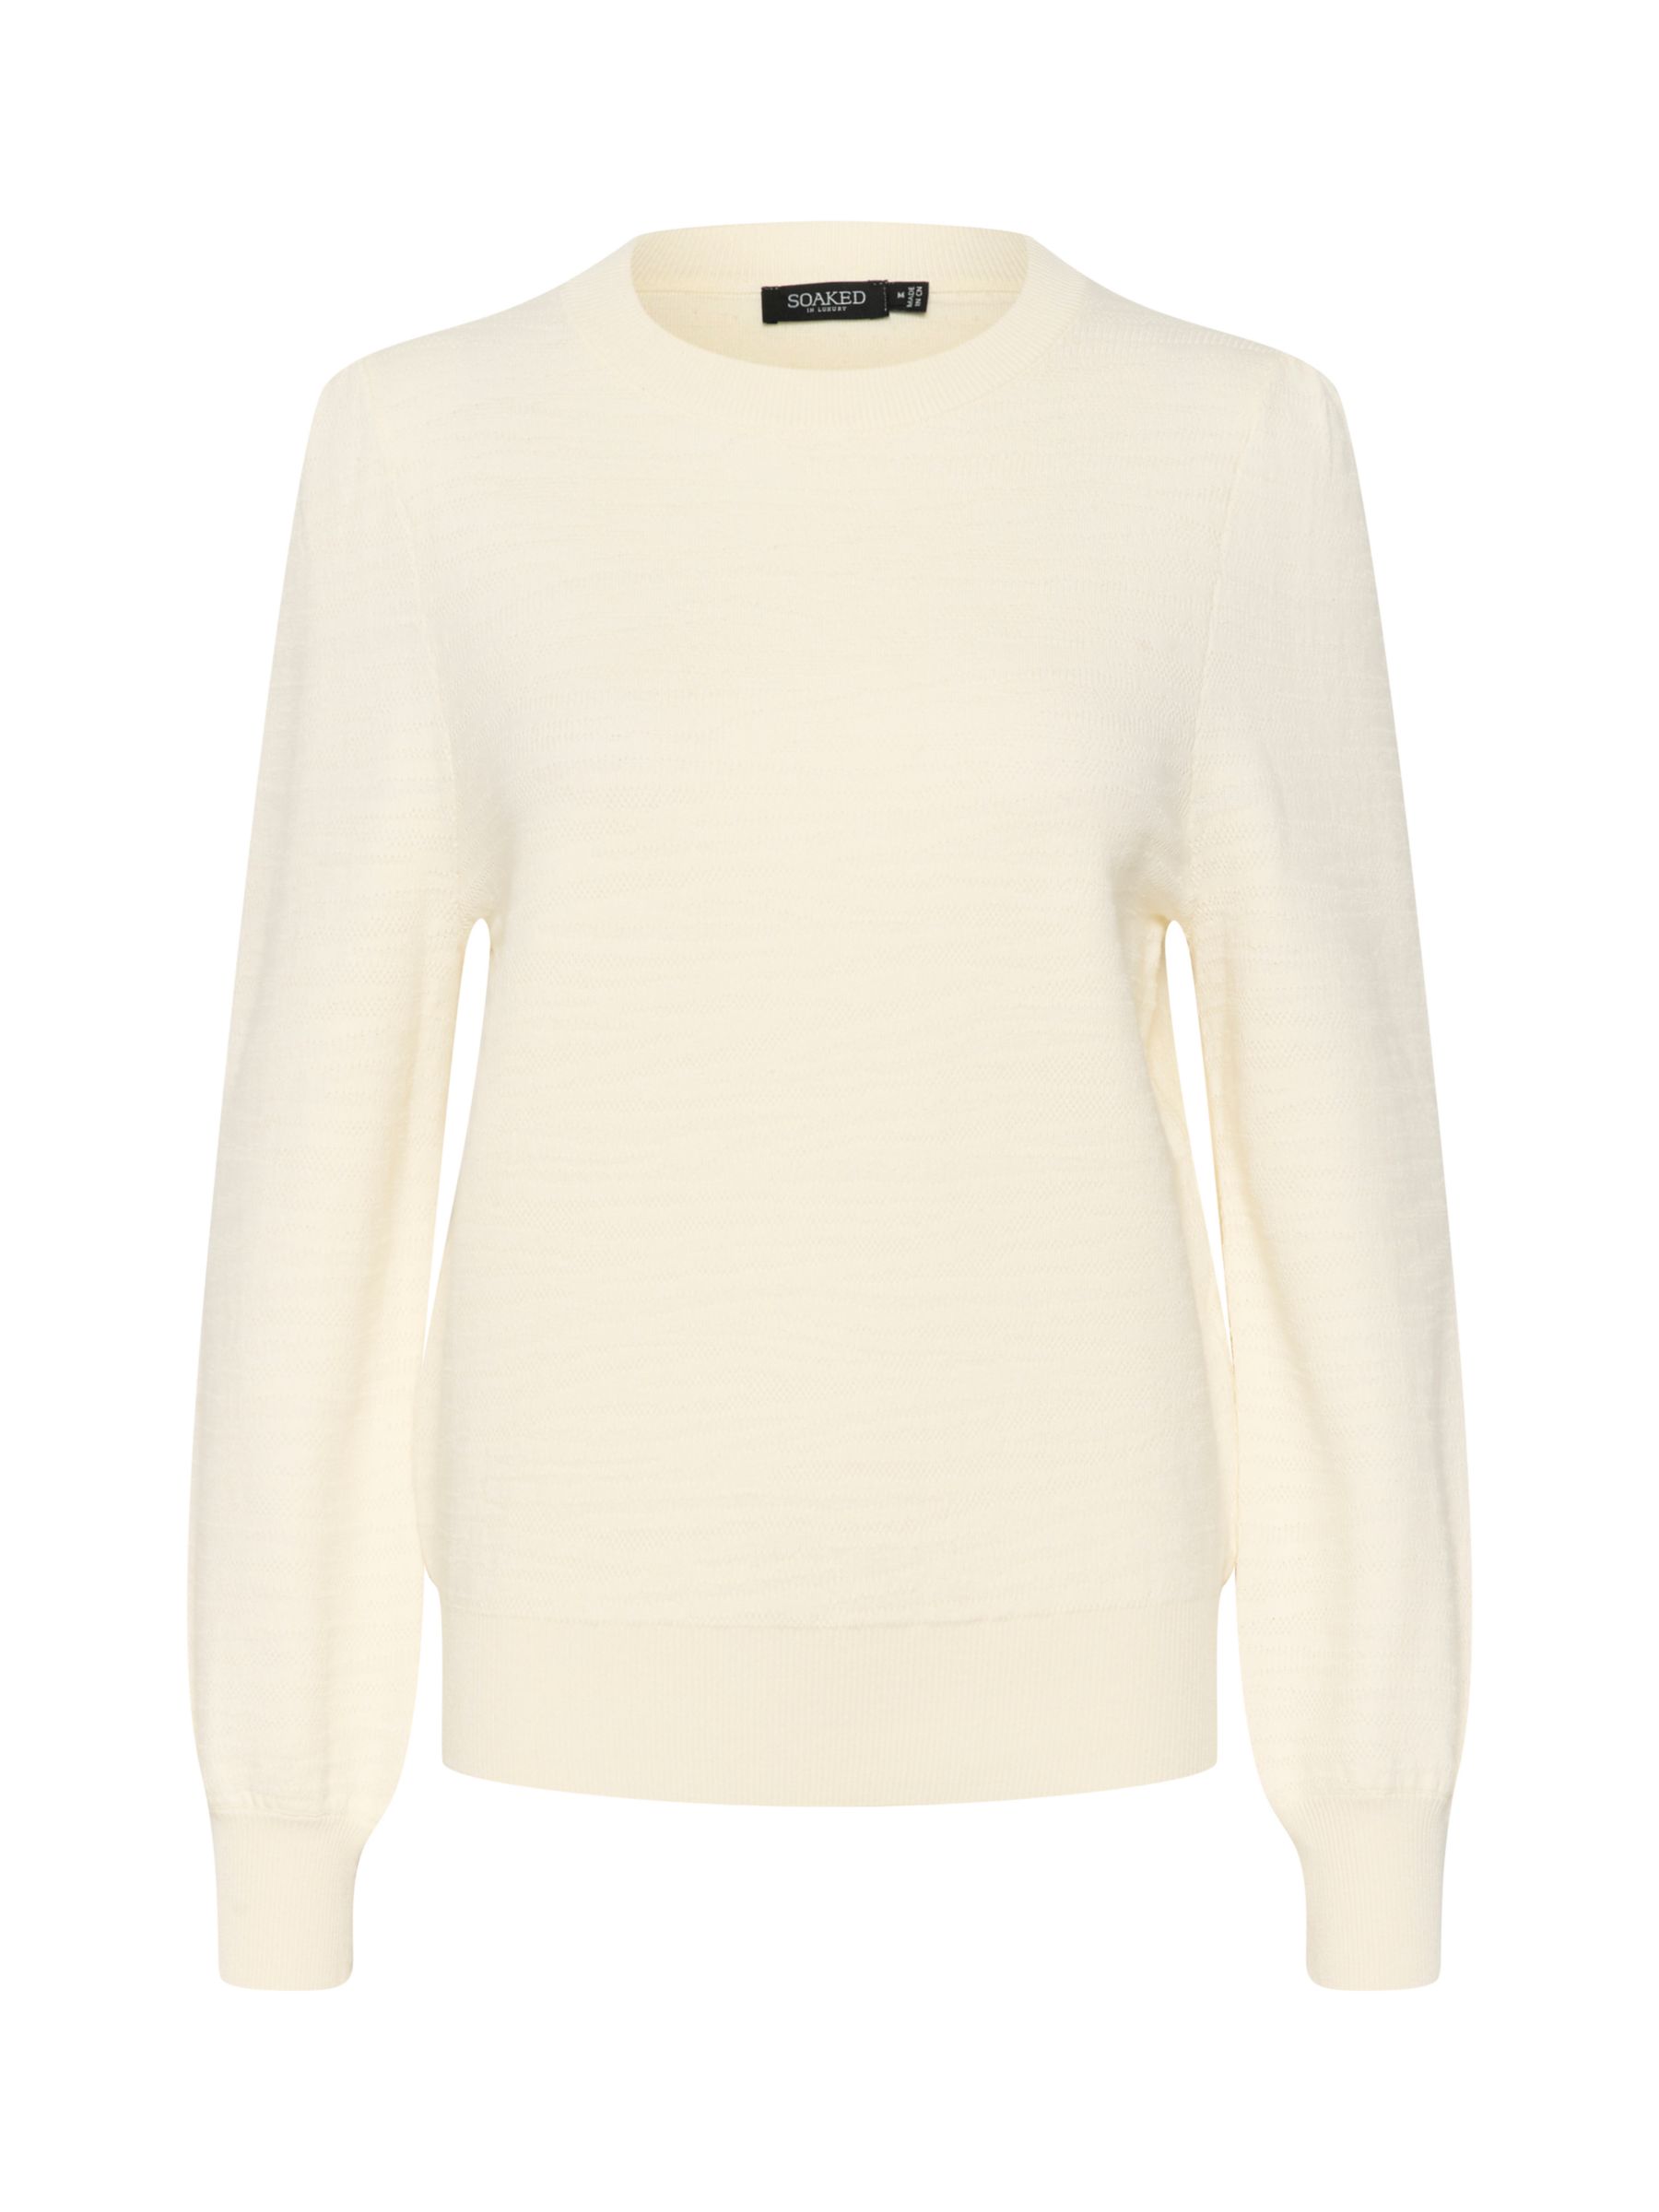 Soaked In Luxury Pipa Jumper, Whisper White, XS